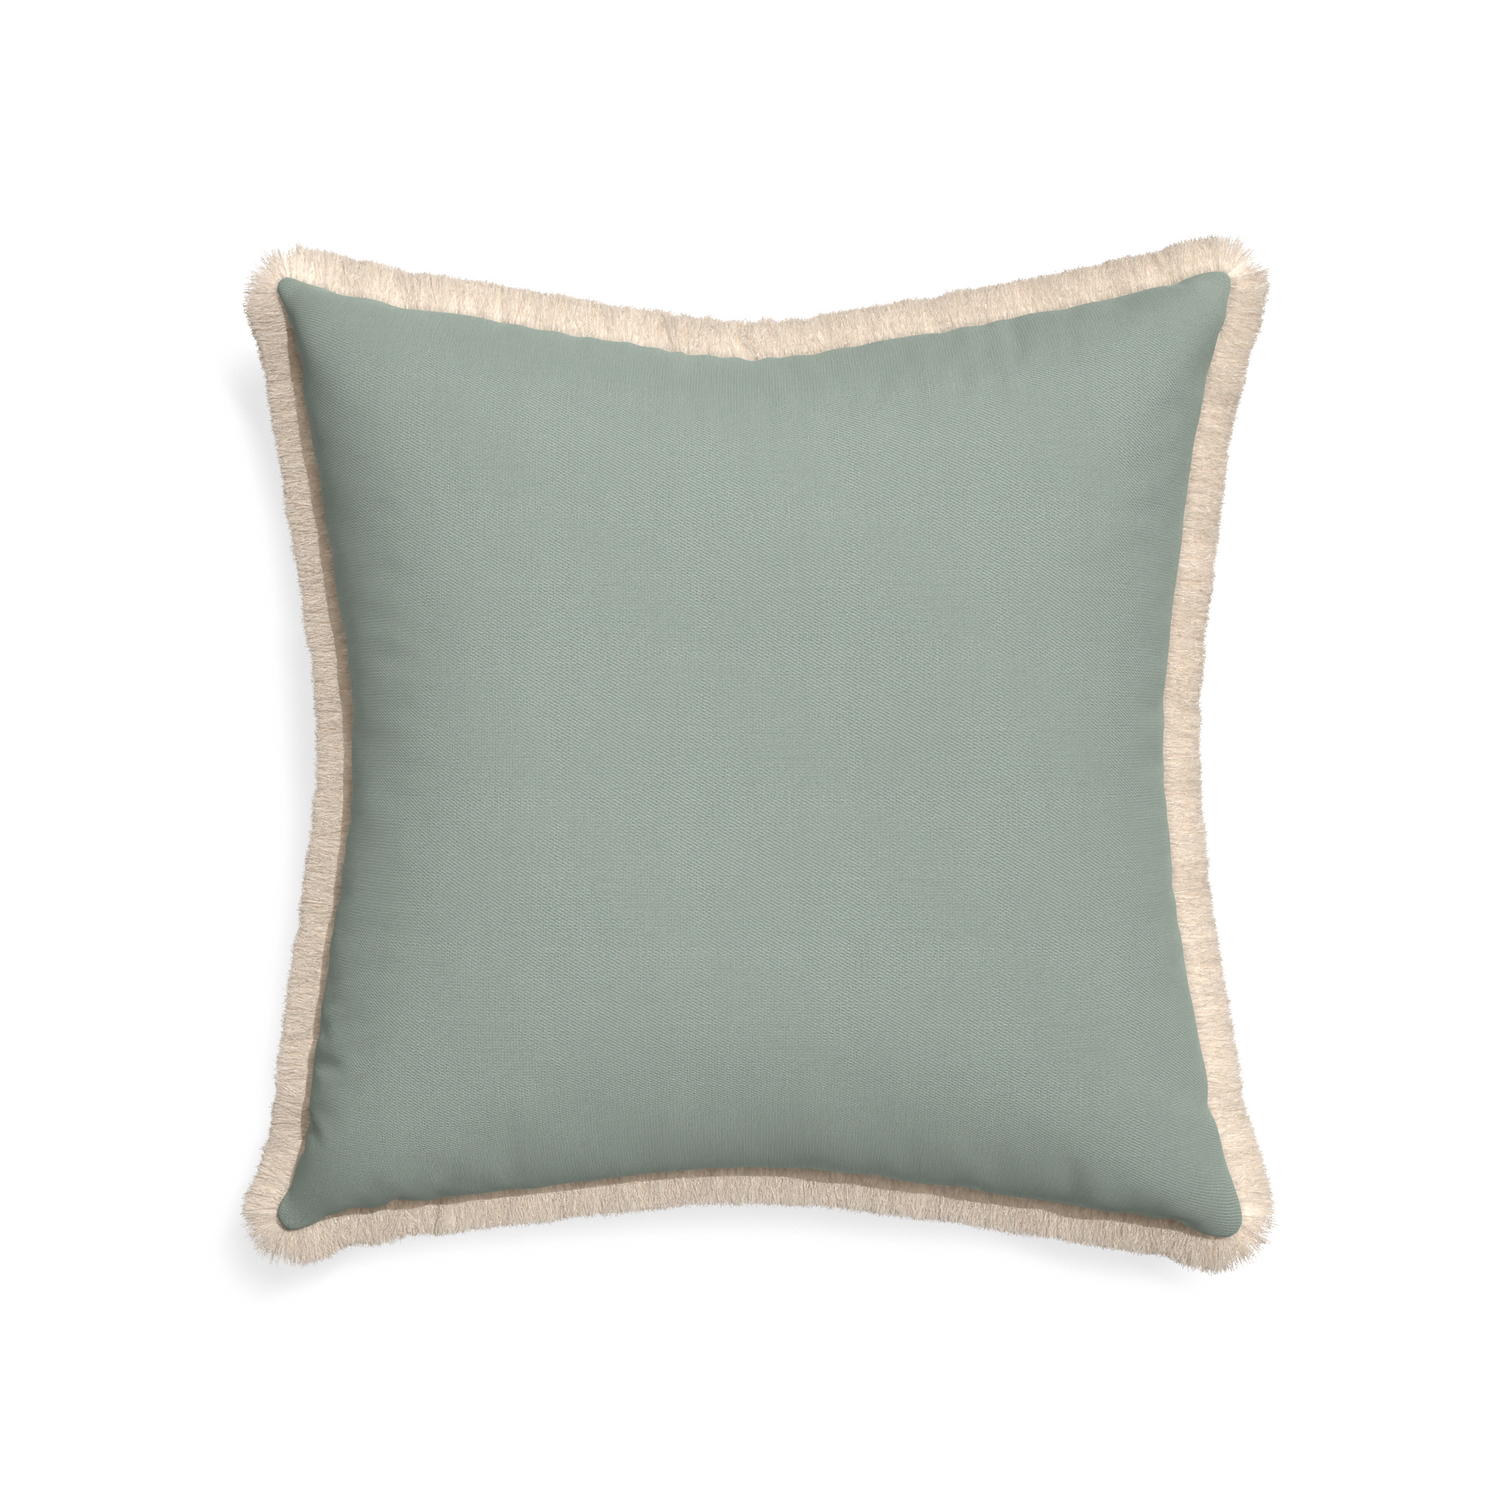 22-square sage custom sage green cottonpillow with cream fringe on white background